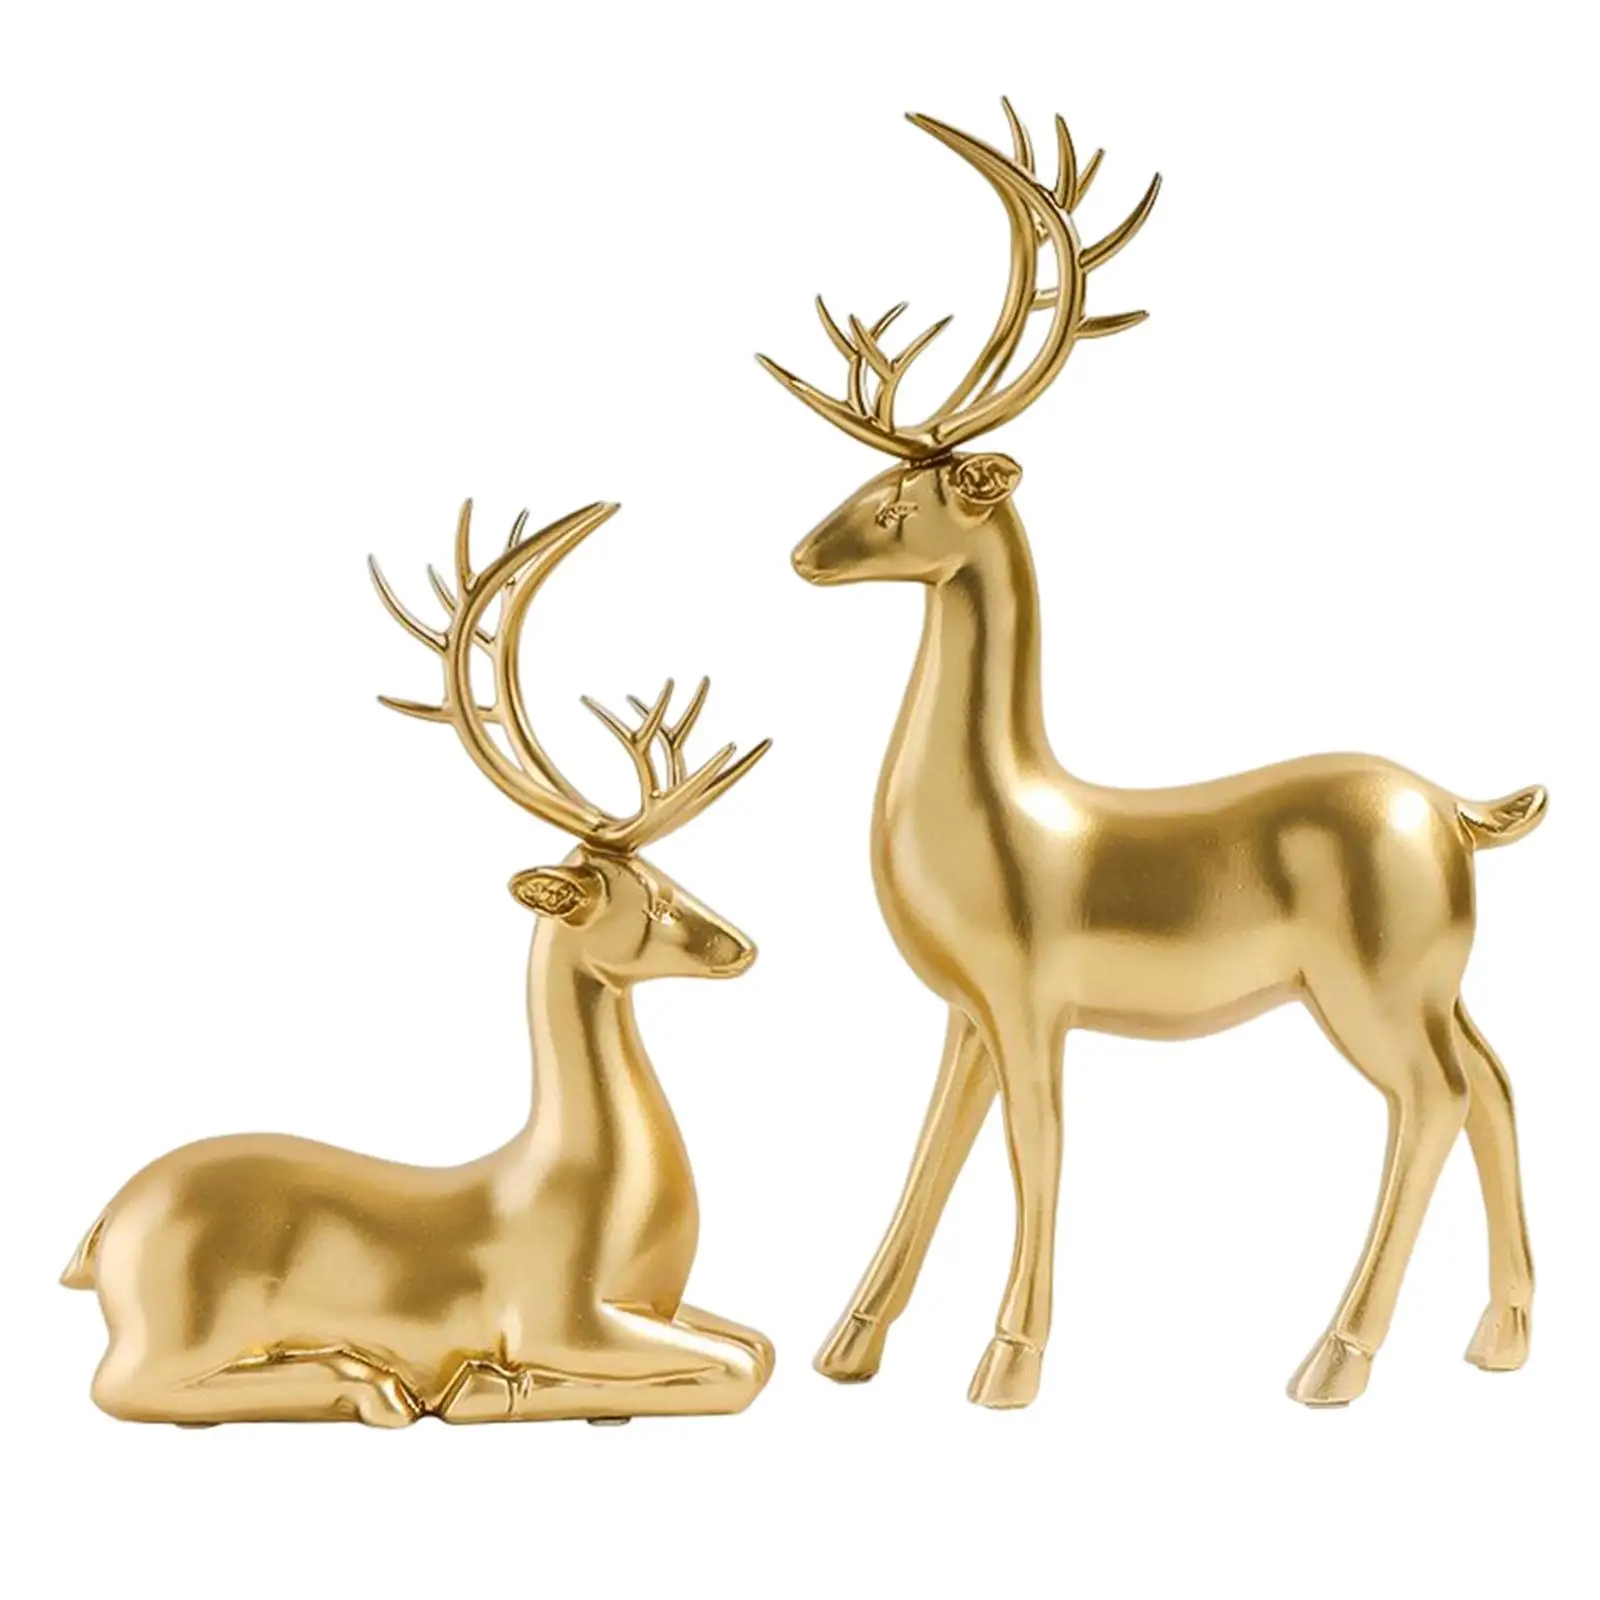 Couple Deer Statue Standing and Sitting Reindeer Figurine Resin Sculpture Ornaments Accents for Party Home Office Holiday Decor